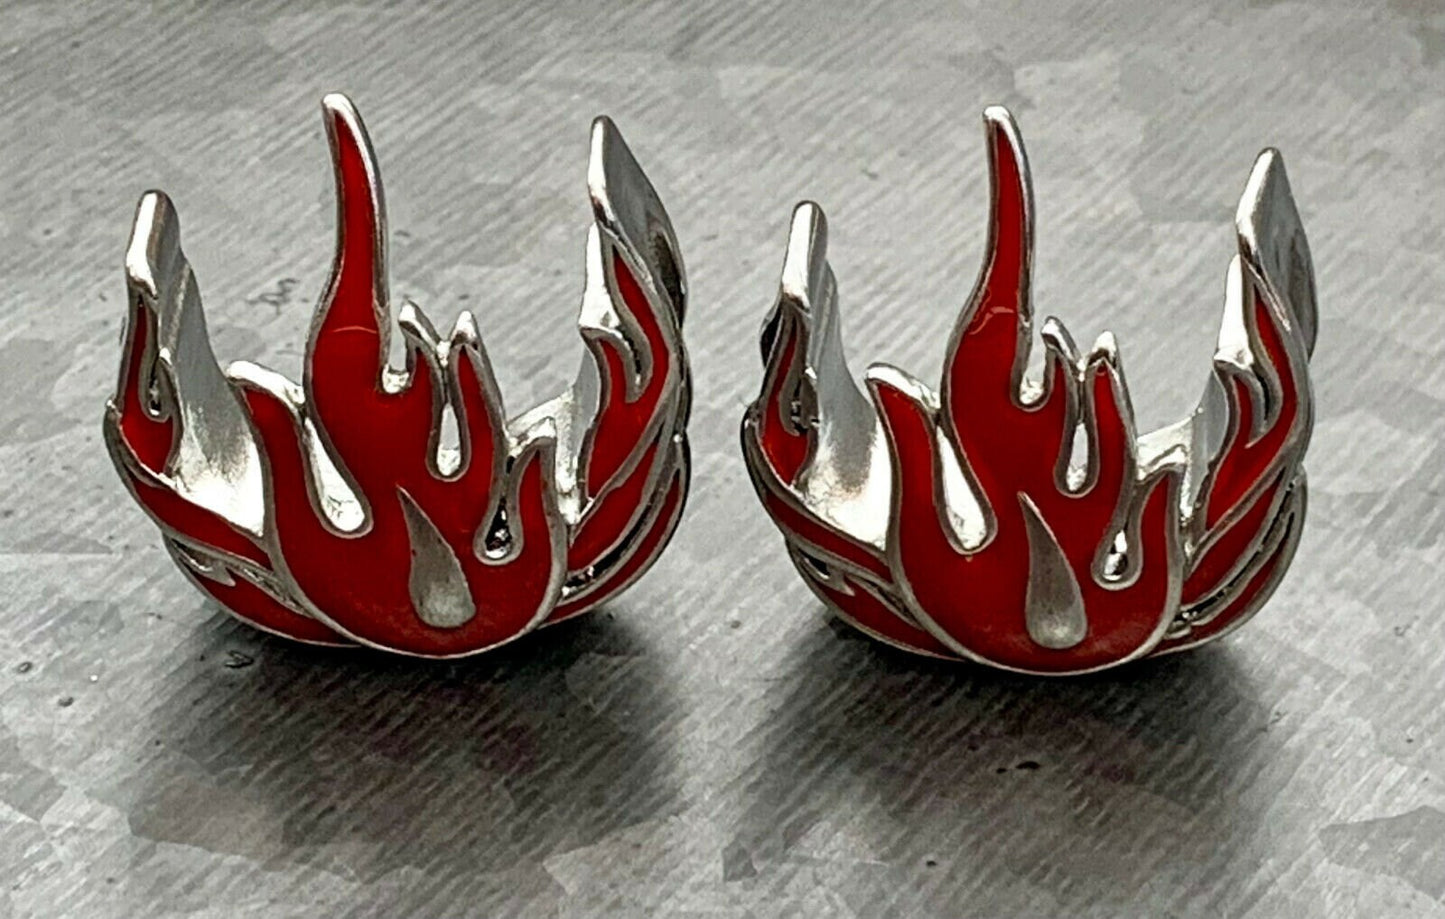 PAIR of Unique Red Flames Steel Saddle Ear Spreader Tunnels/Plugs - Gauges 00g (10mm) thru 1" (25mm) available!